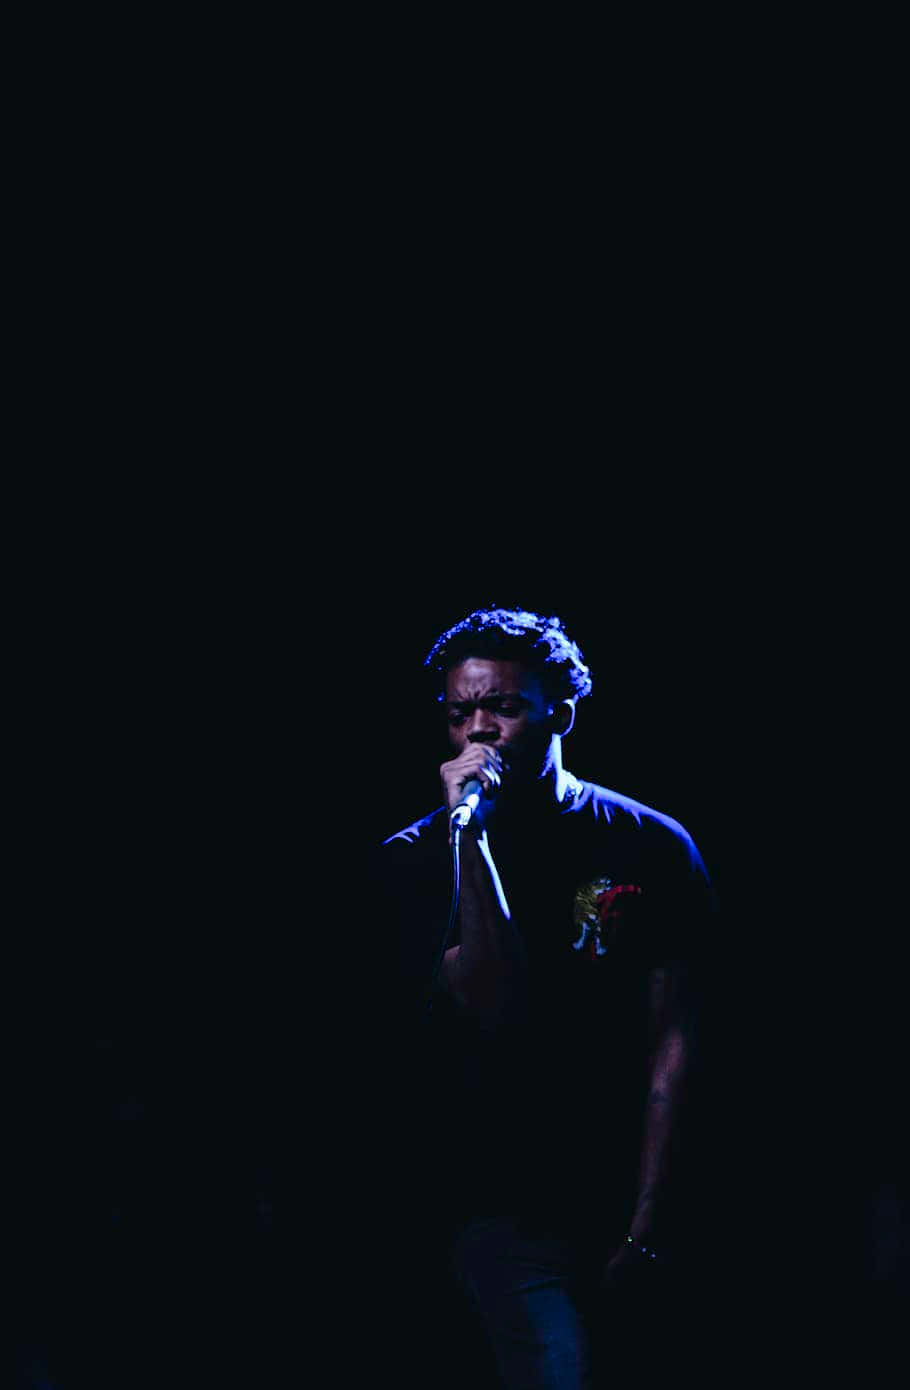 A Man Singing Into A Microphone In The Dark